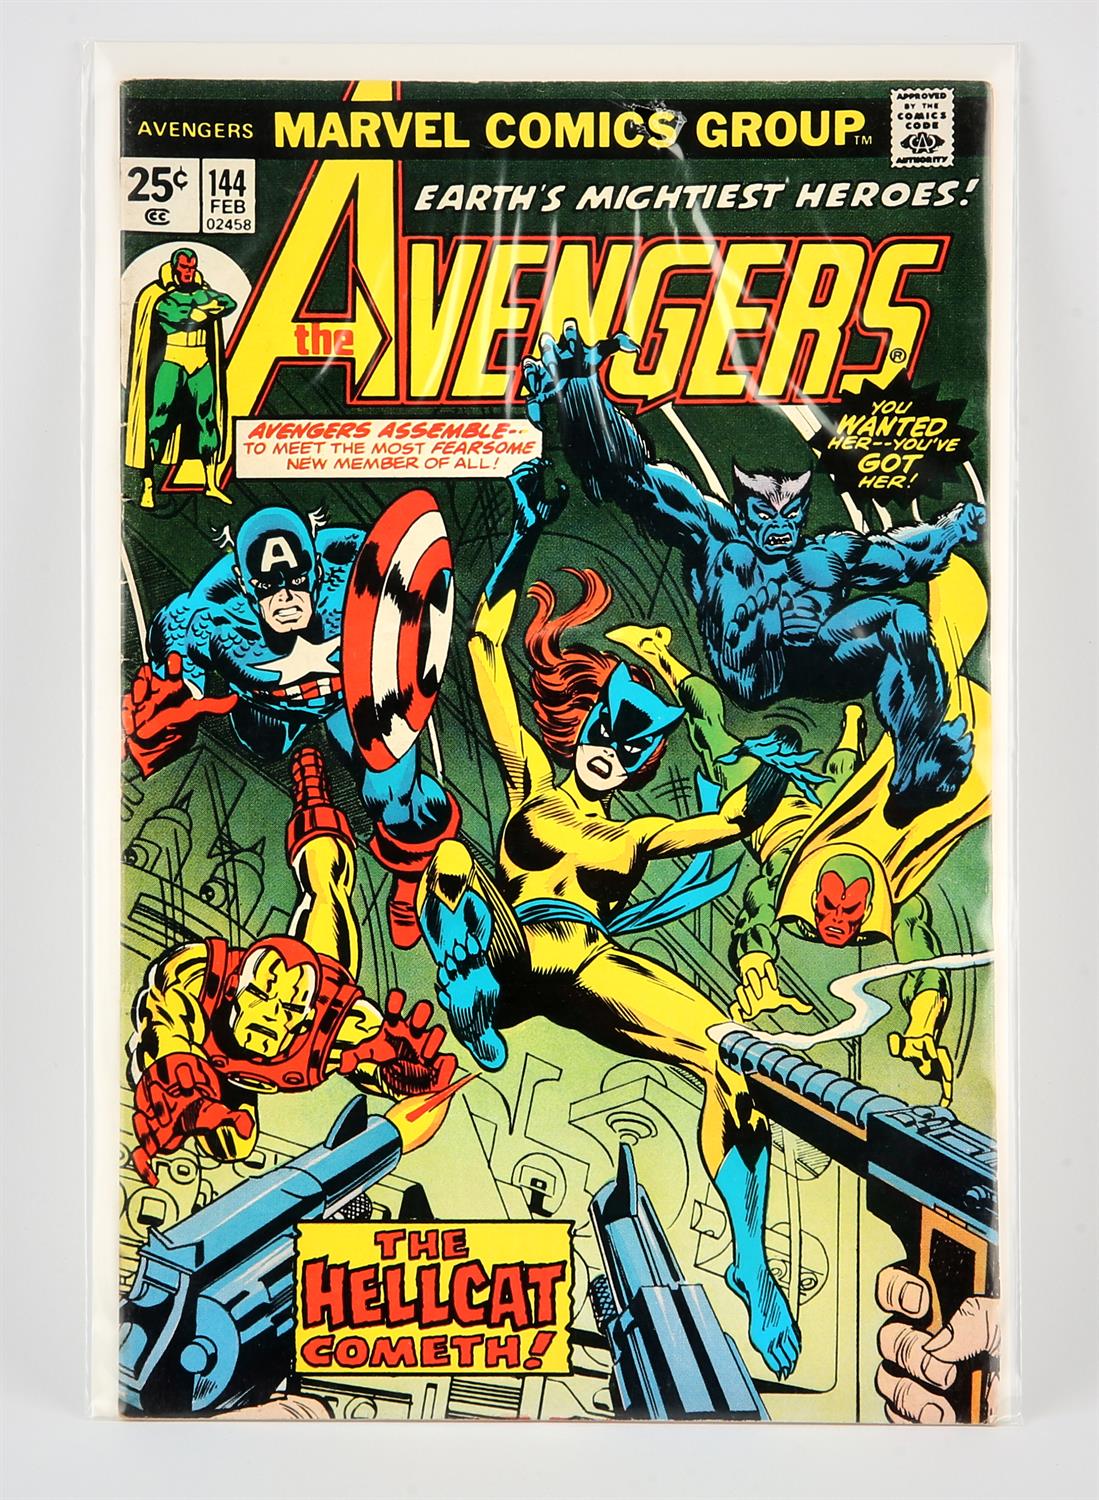 Marvel Comics: Avengers No. 144 featuring the 1st appearance of Hellcat (1973). This issue also